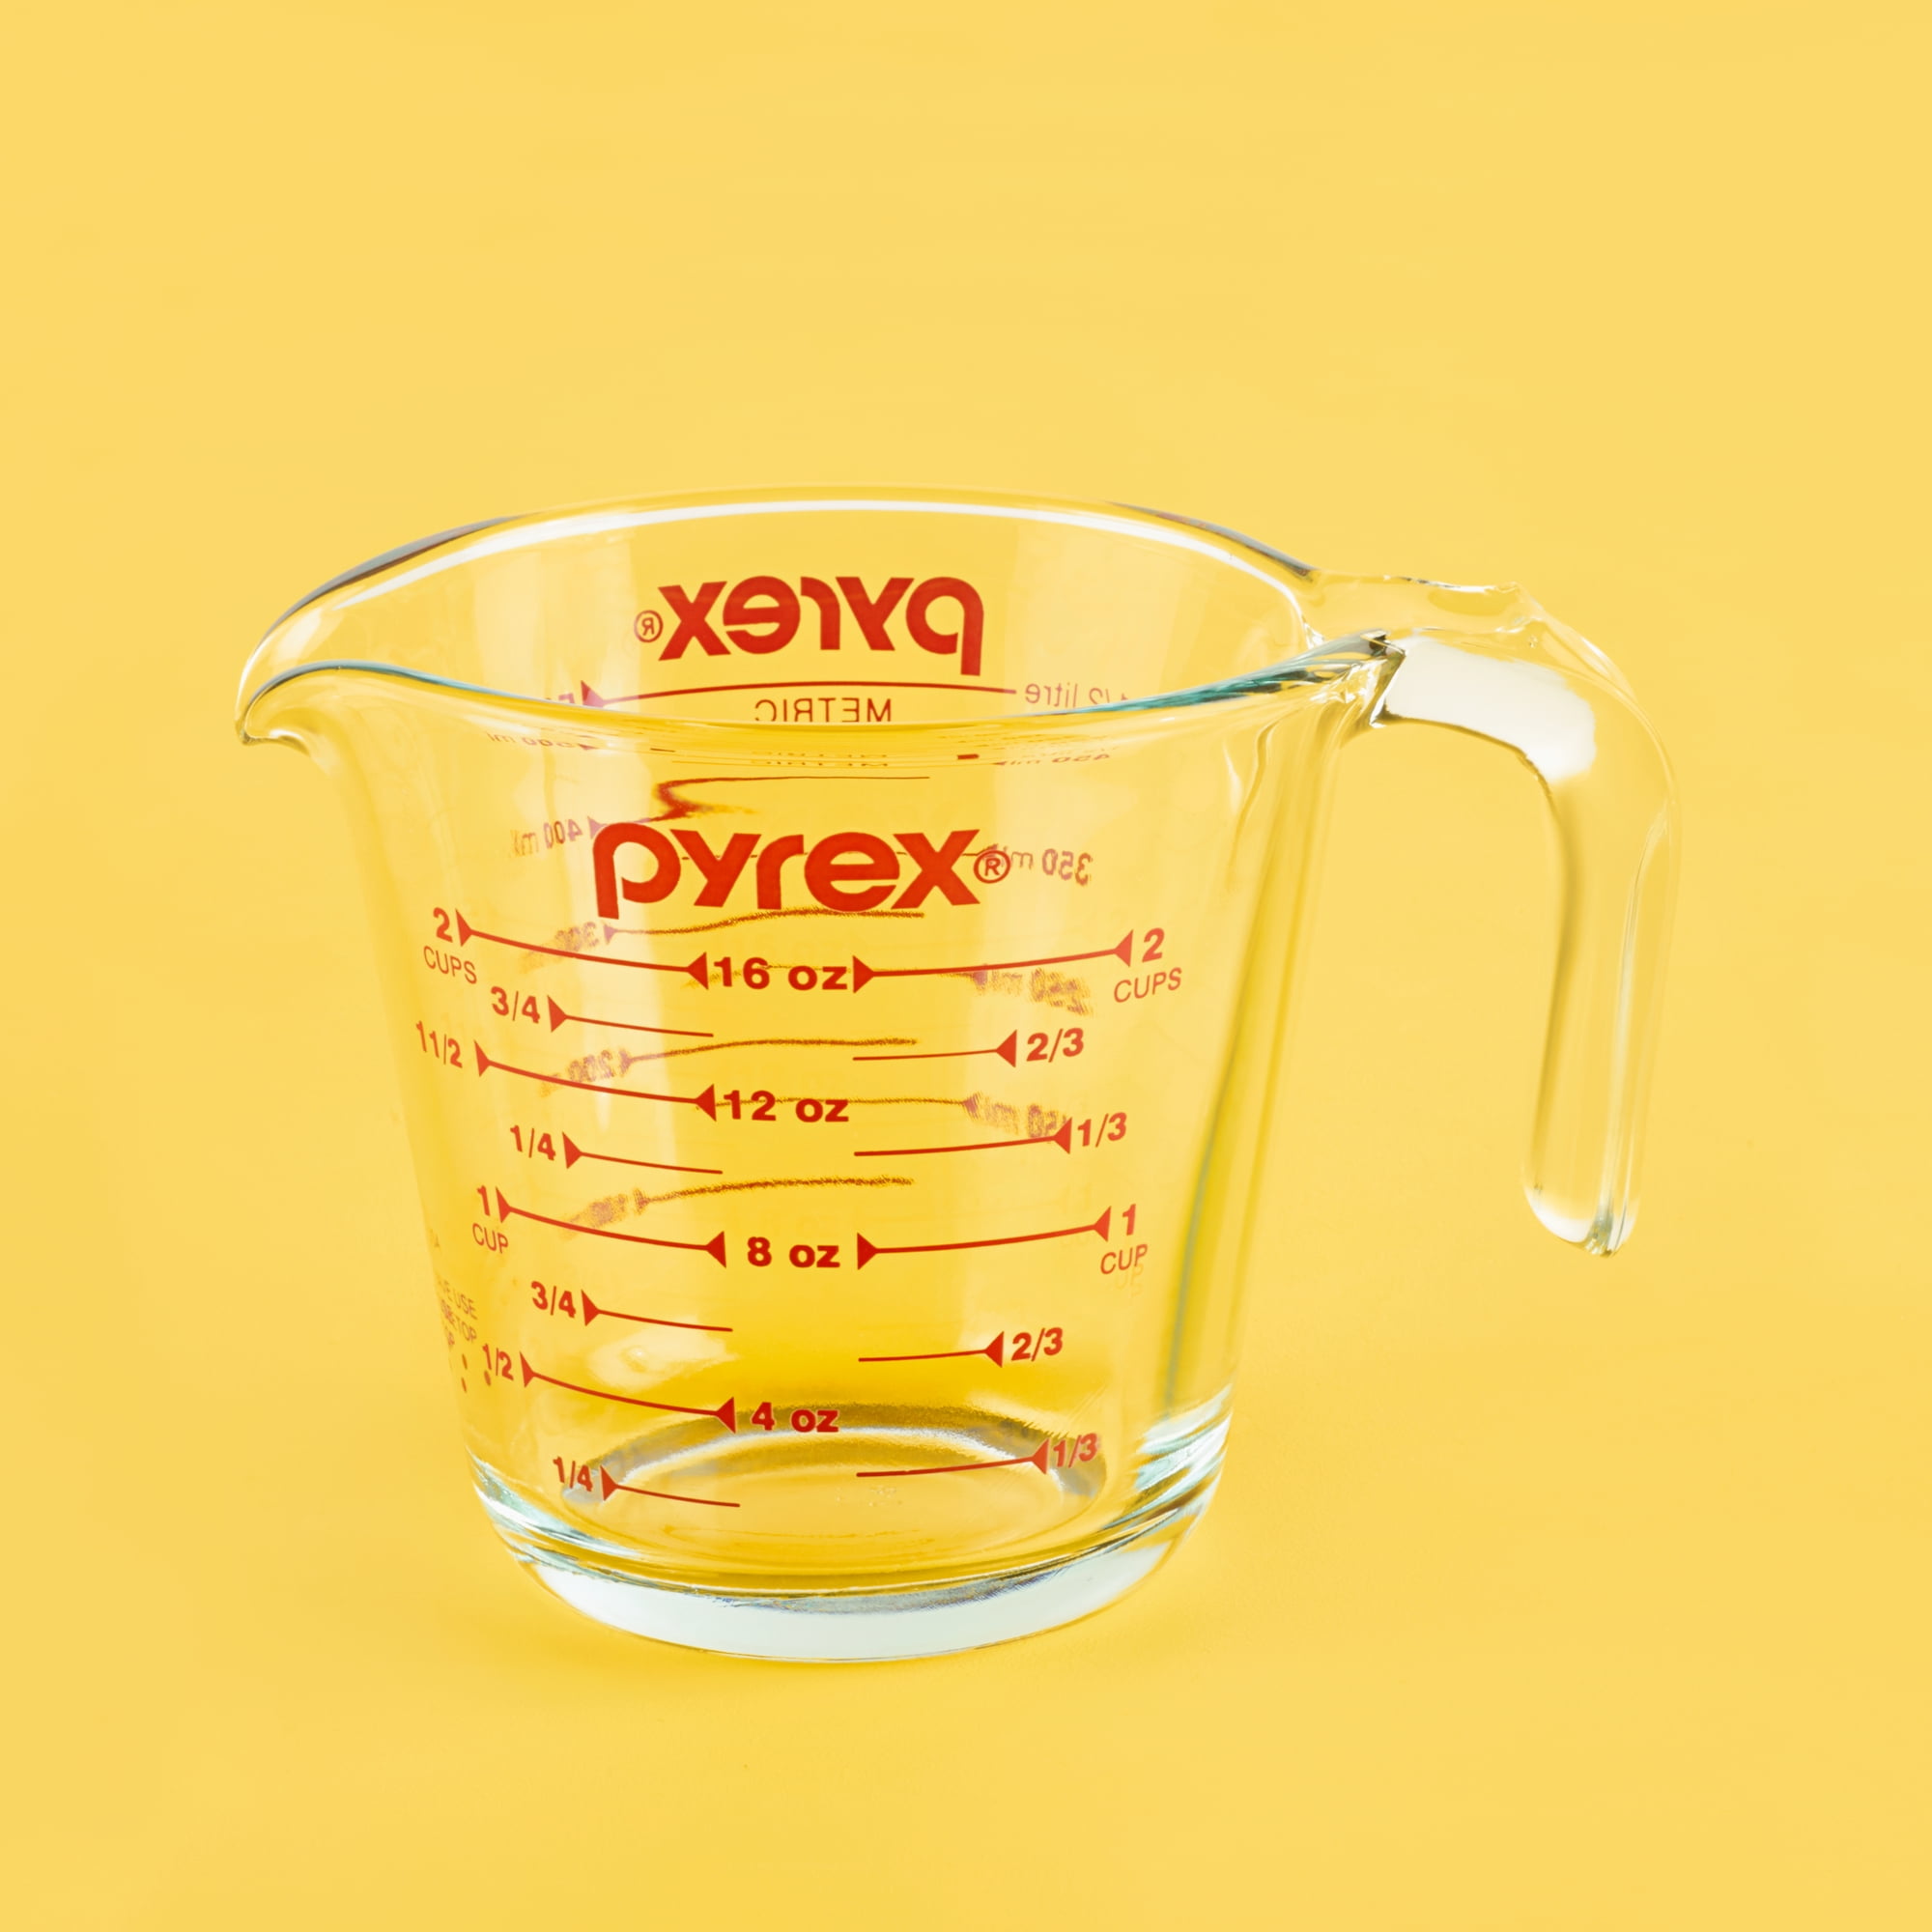 Pyrex Glass Measuring Cup Set (3-Piece, Microwave and Oven Safe),Clear